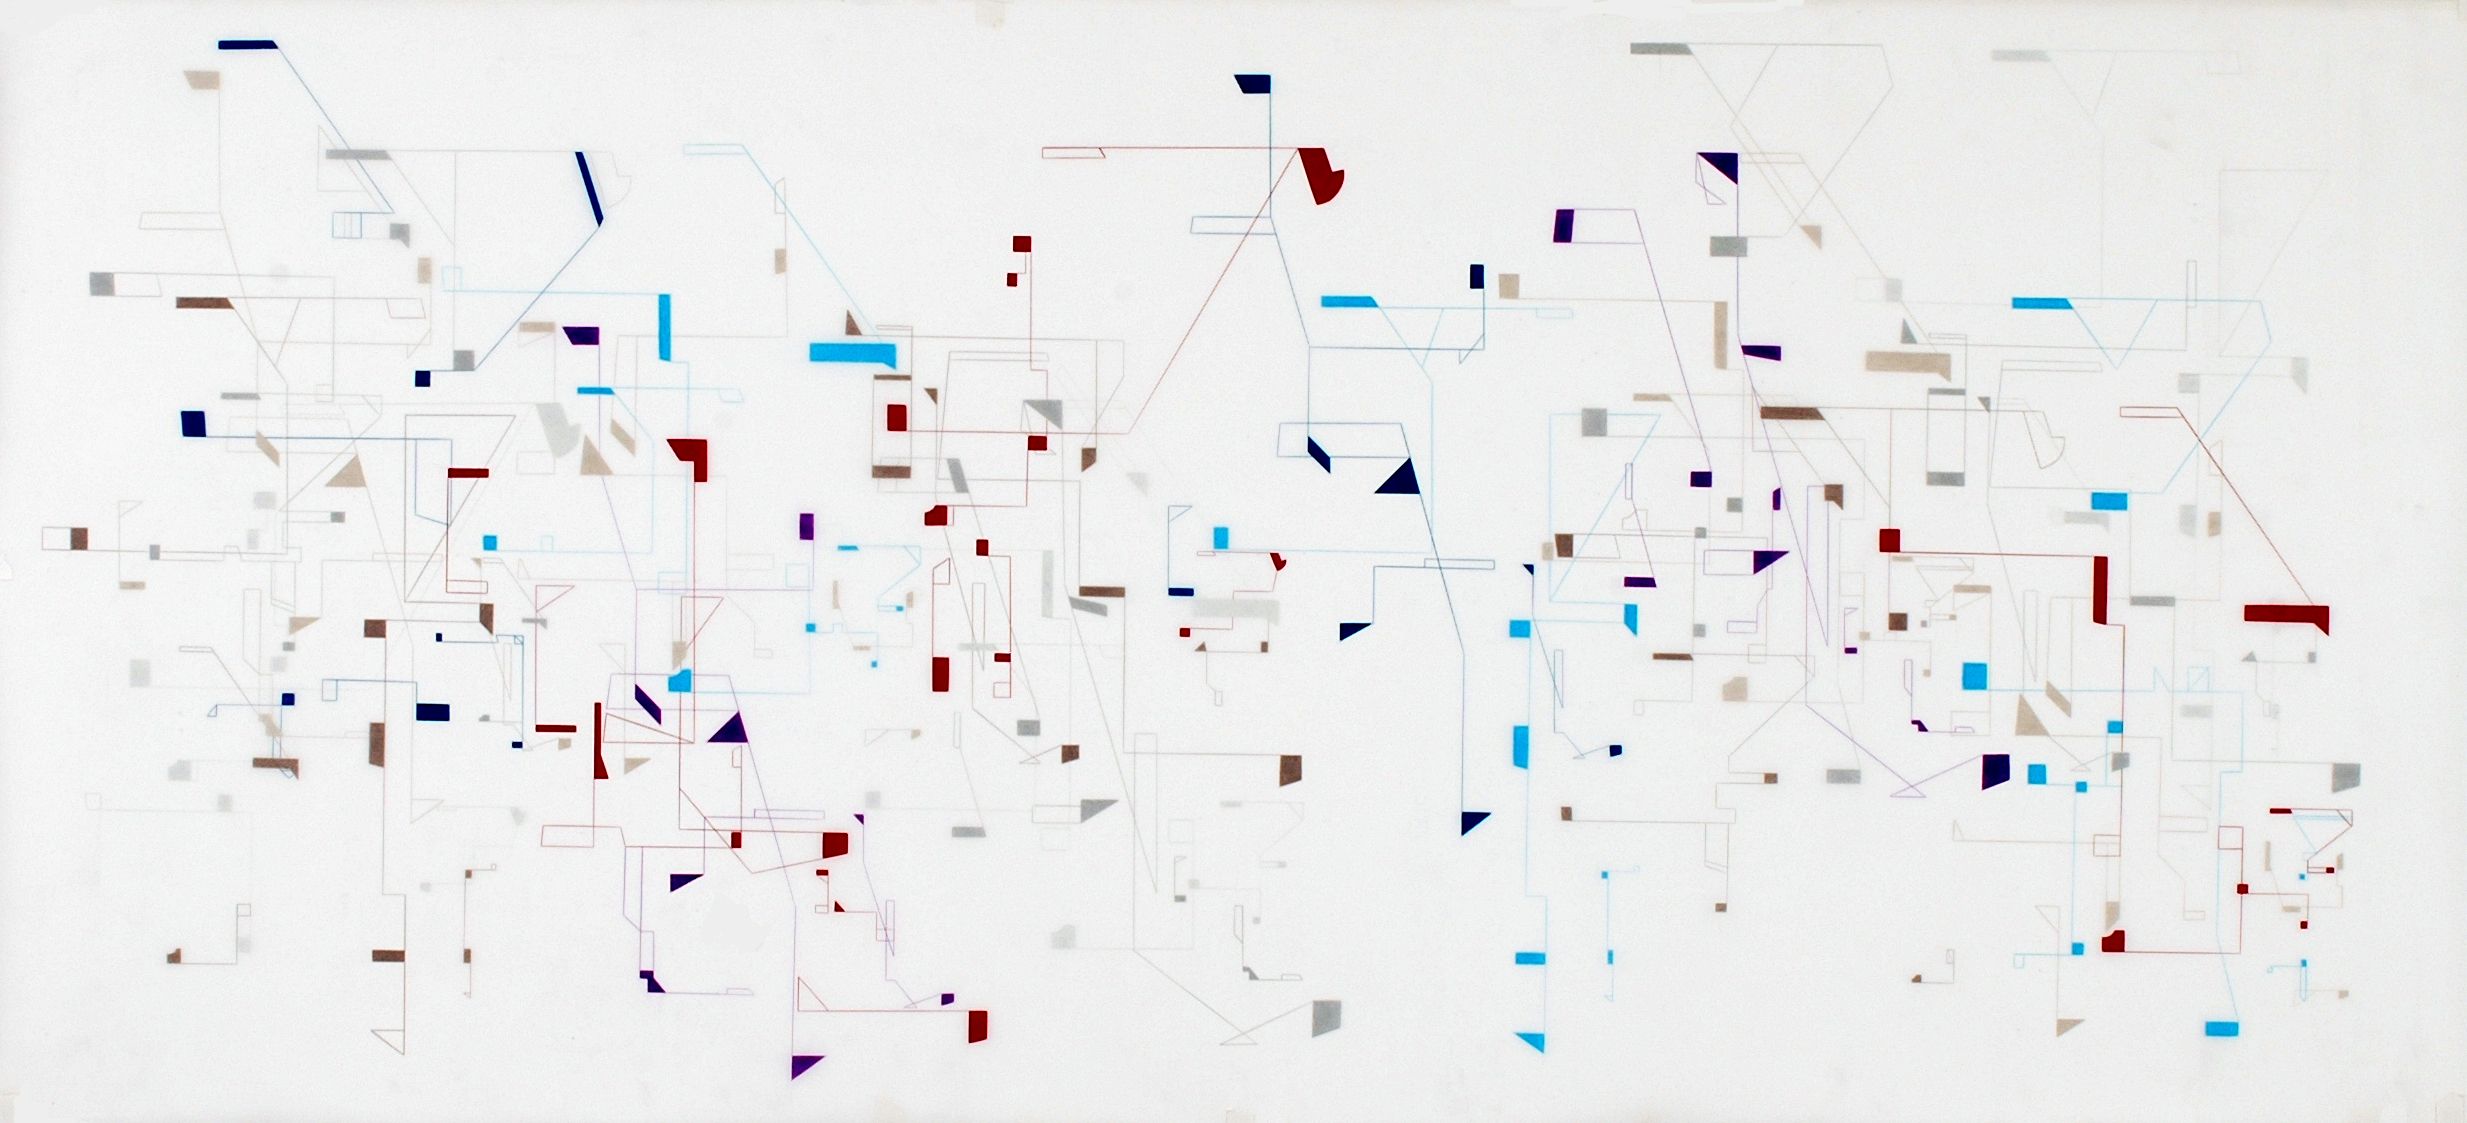 Spectral Variant #3b 4x12
Colored Pencil on Mylar
42 x 92 inches, 2008